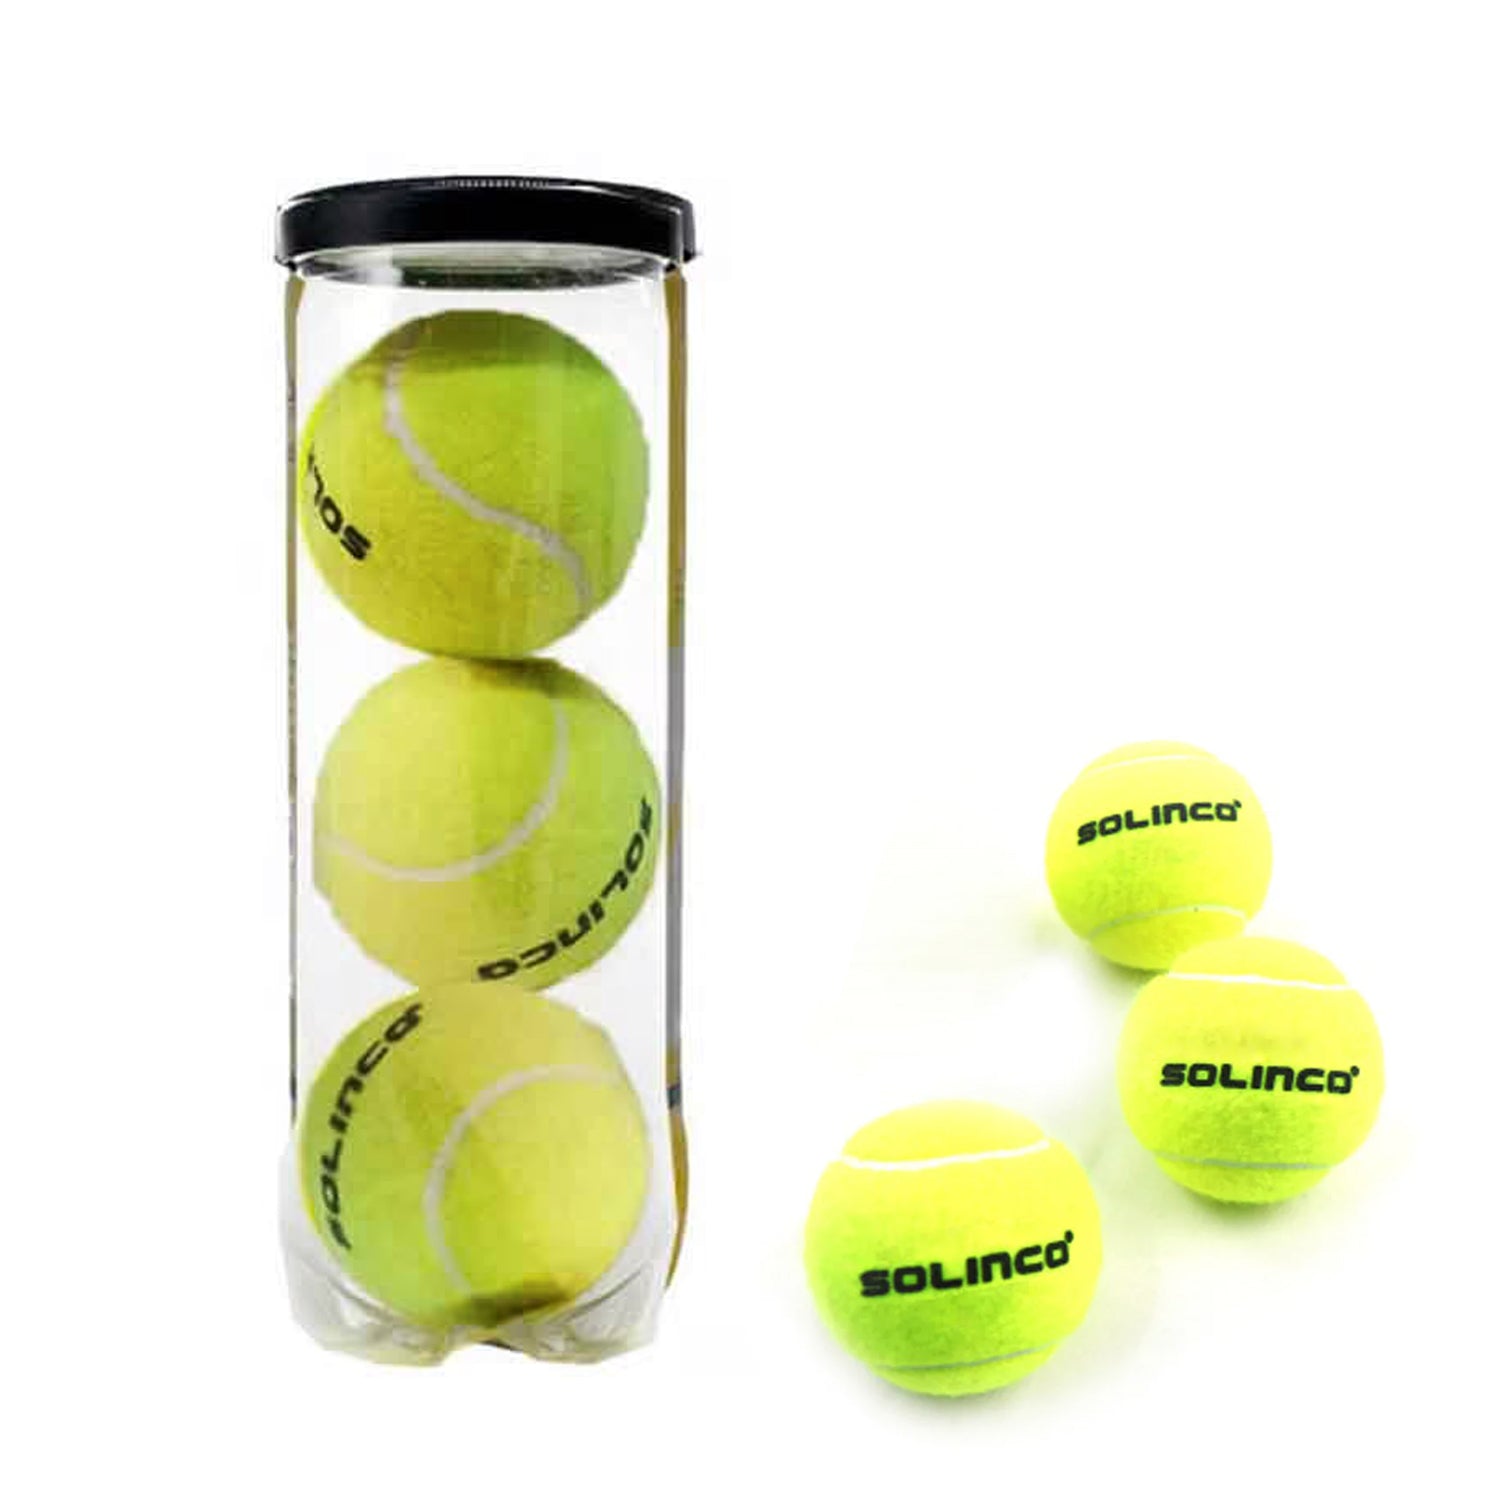 Solinco Pro Performance Tennis Ball, 24 Cans (72 Balls)